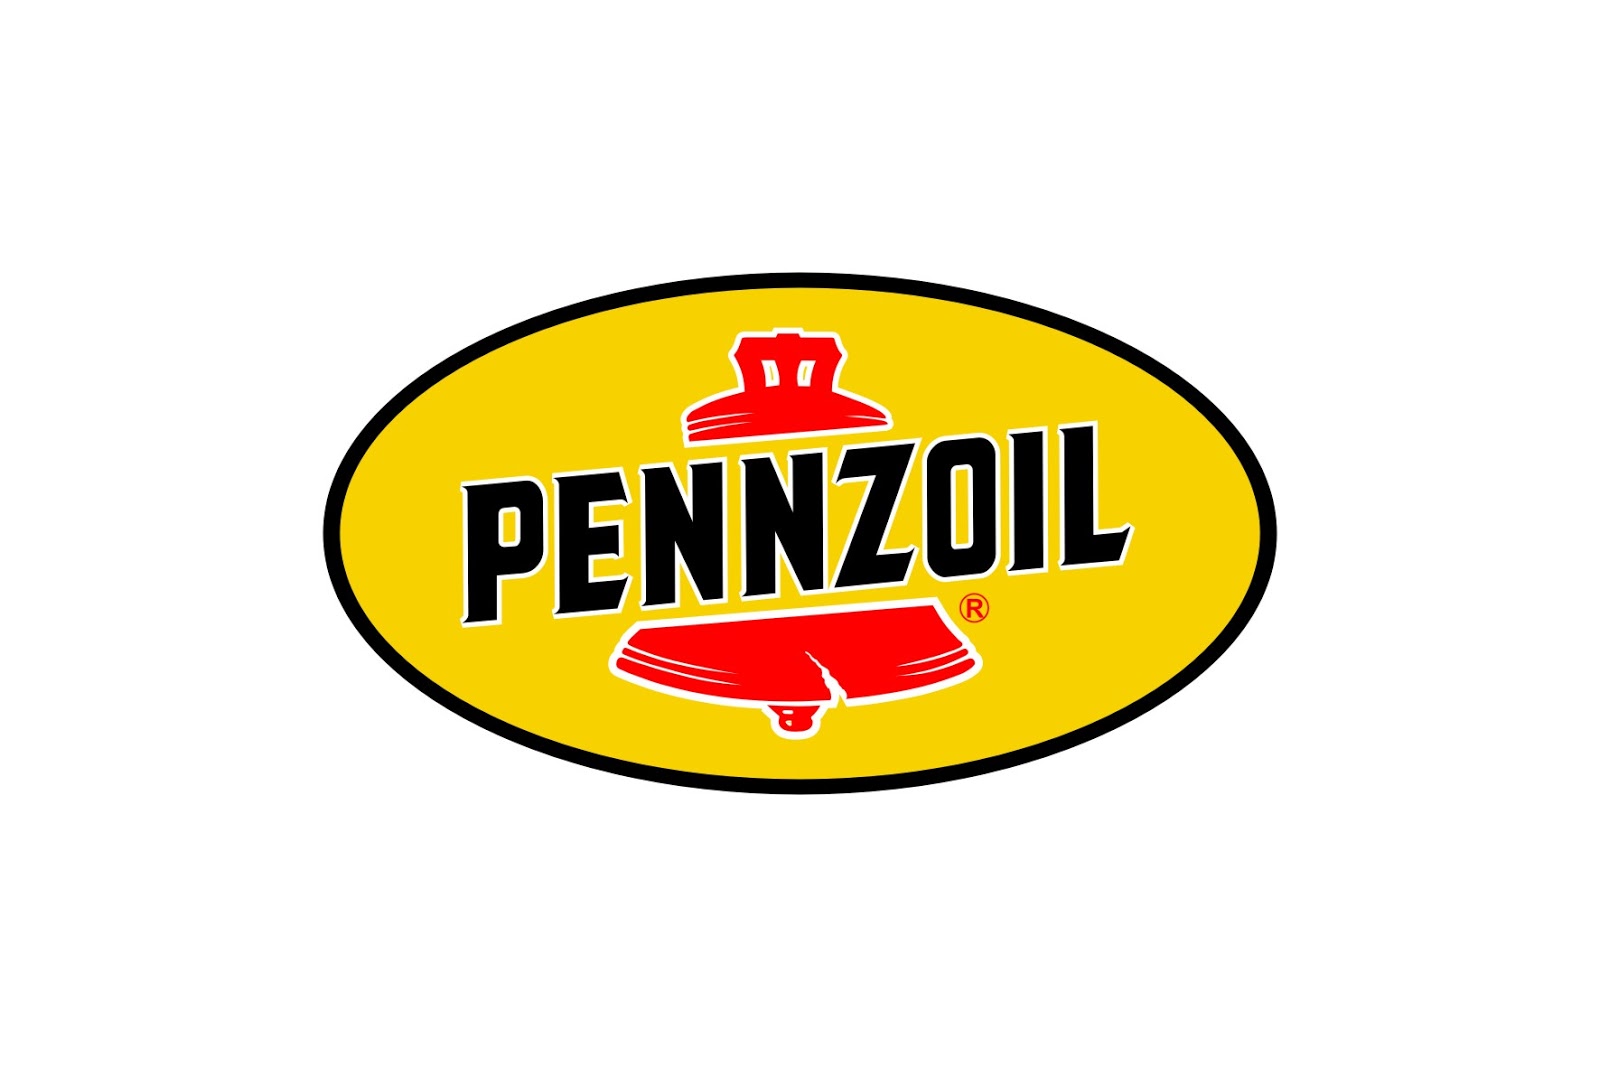 Pennzoil Partners with NLCRC on Container Recycling Efforts | THE SHOP